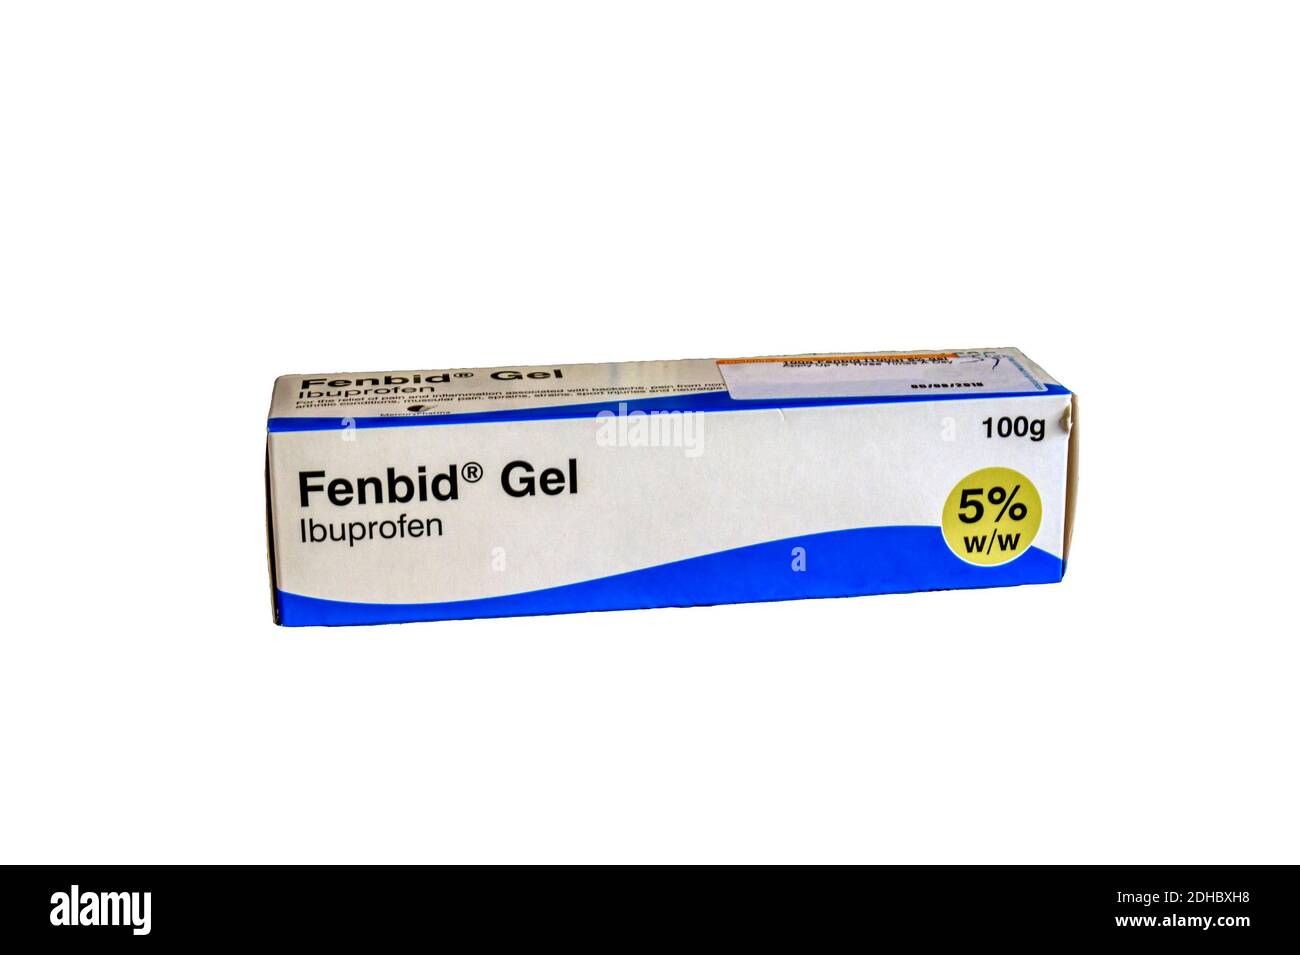 A box of Fenbid Gel containing Ibuprofen for application to the skin to relieve pain and inflammation. Stock Photo